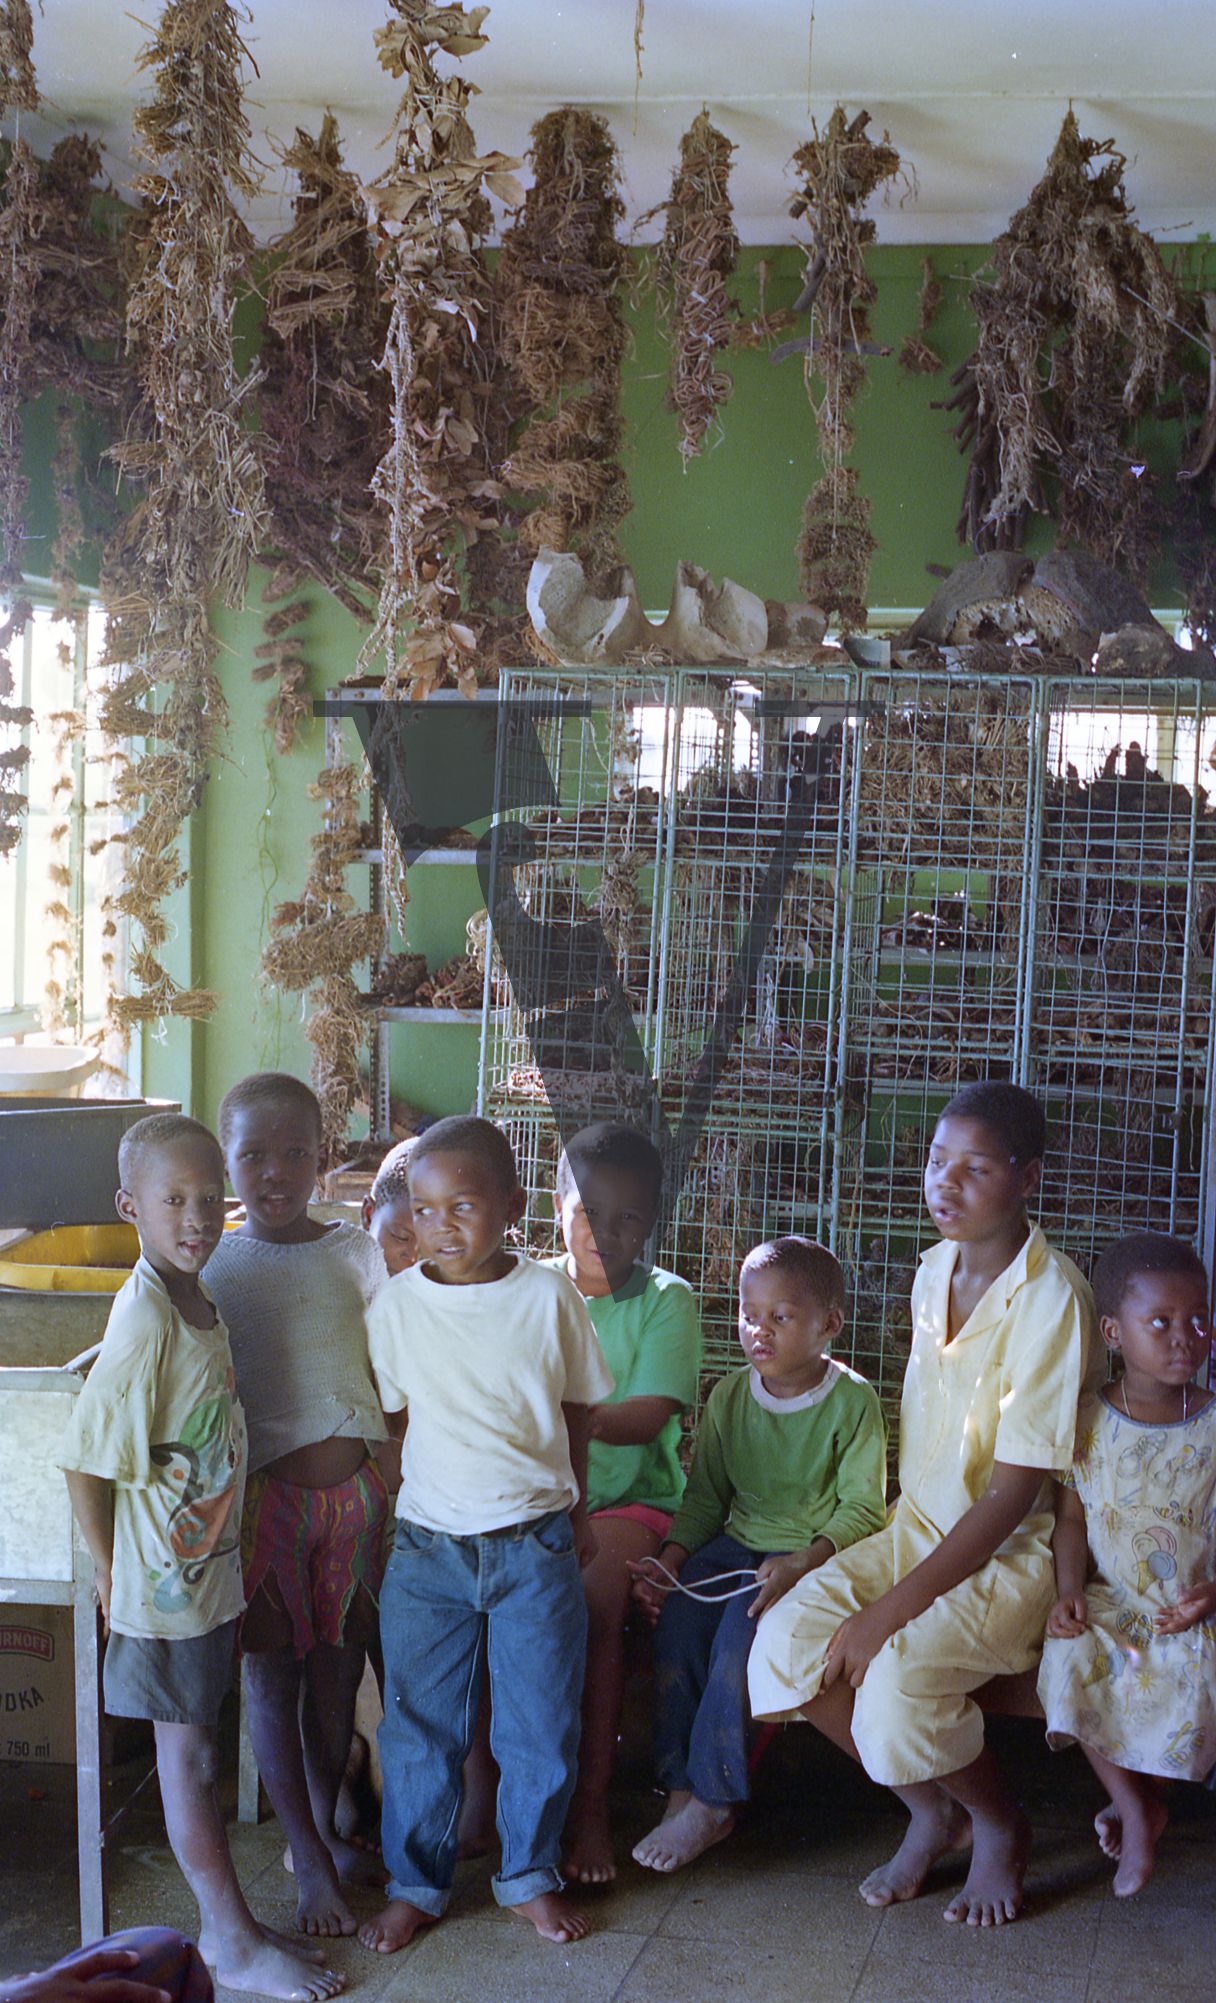 Sangoma, Zululand, Inyanga, group of children in the Cele store.